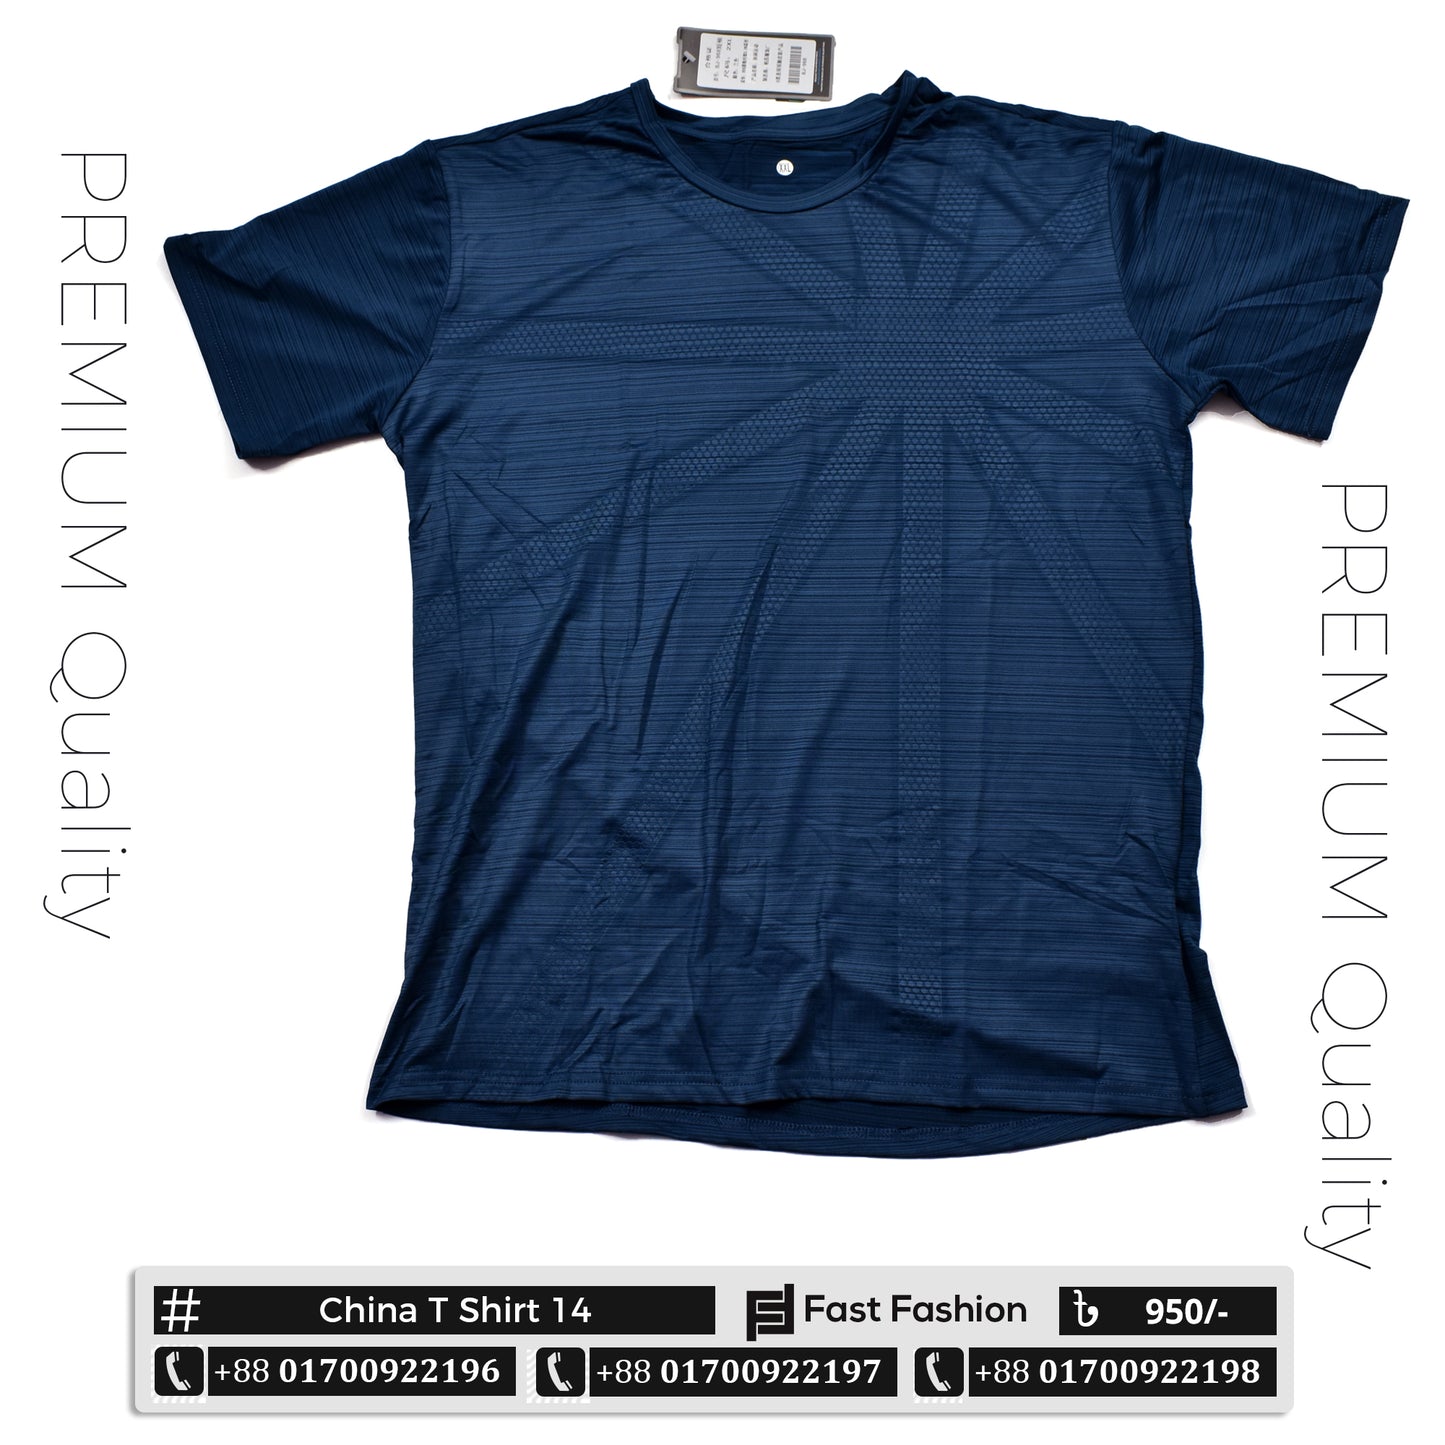 Premium Quality Stitch China T-Shirt 14 | It's all about Fabric - Extreme Comfort